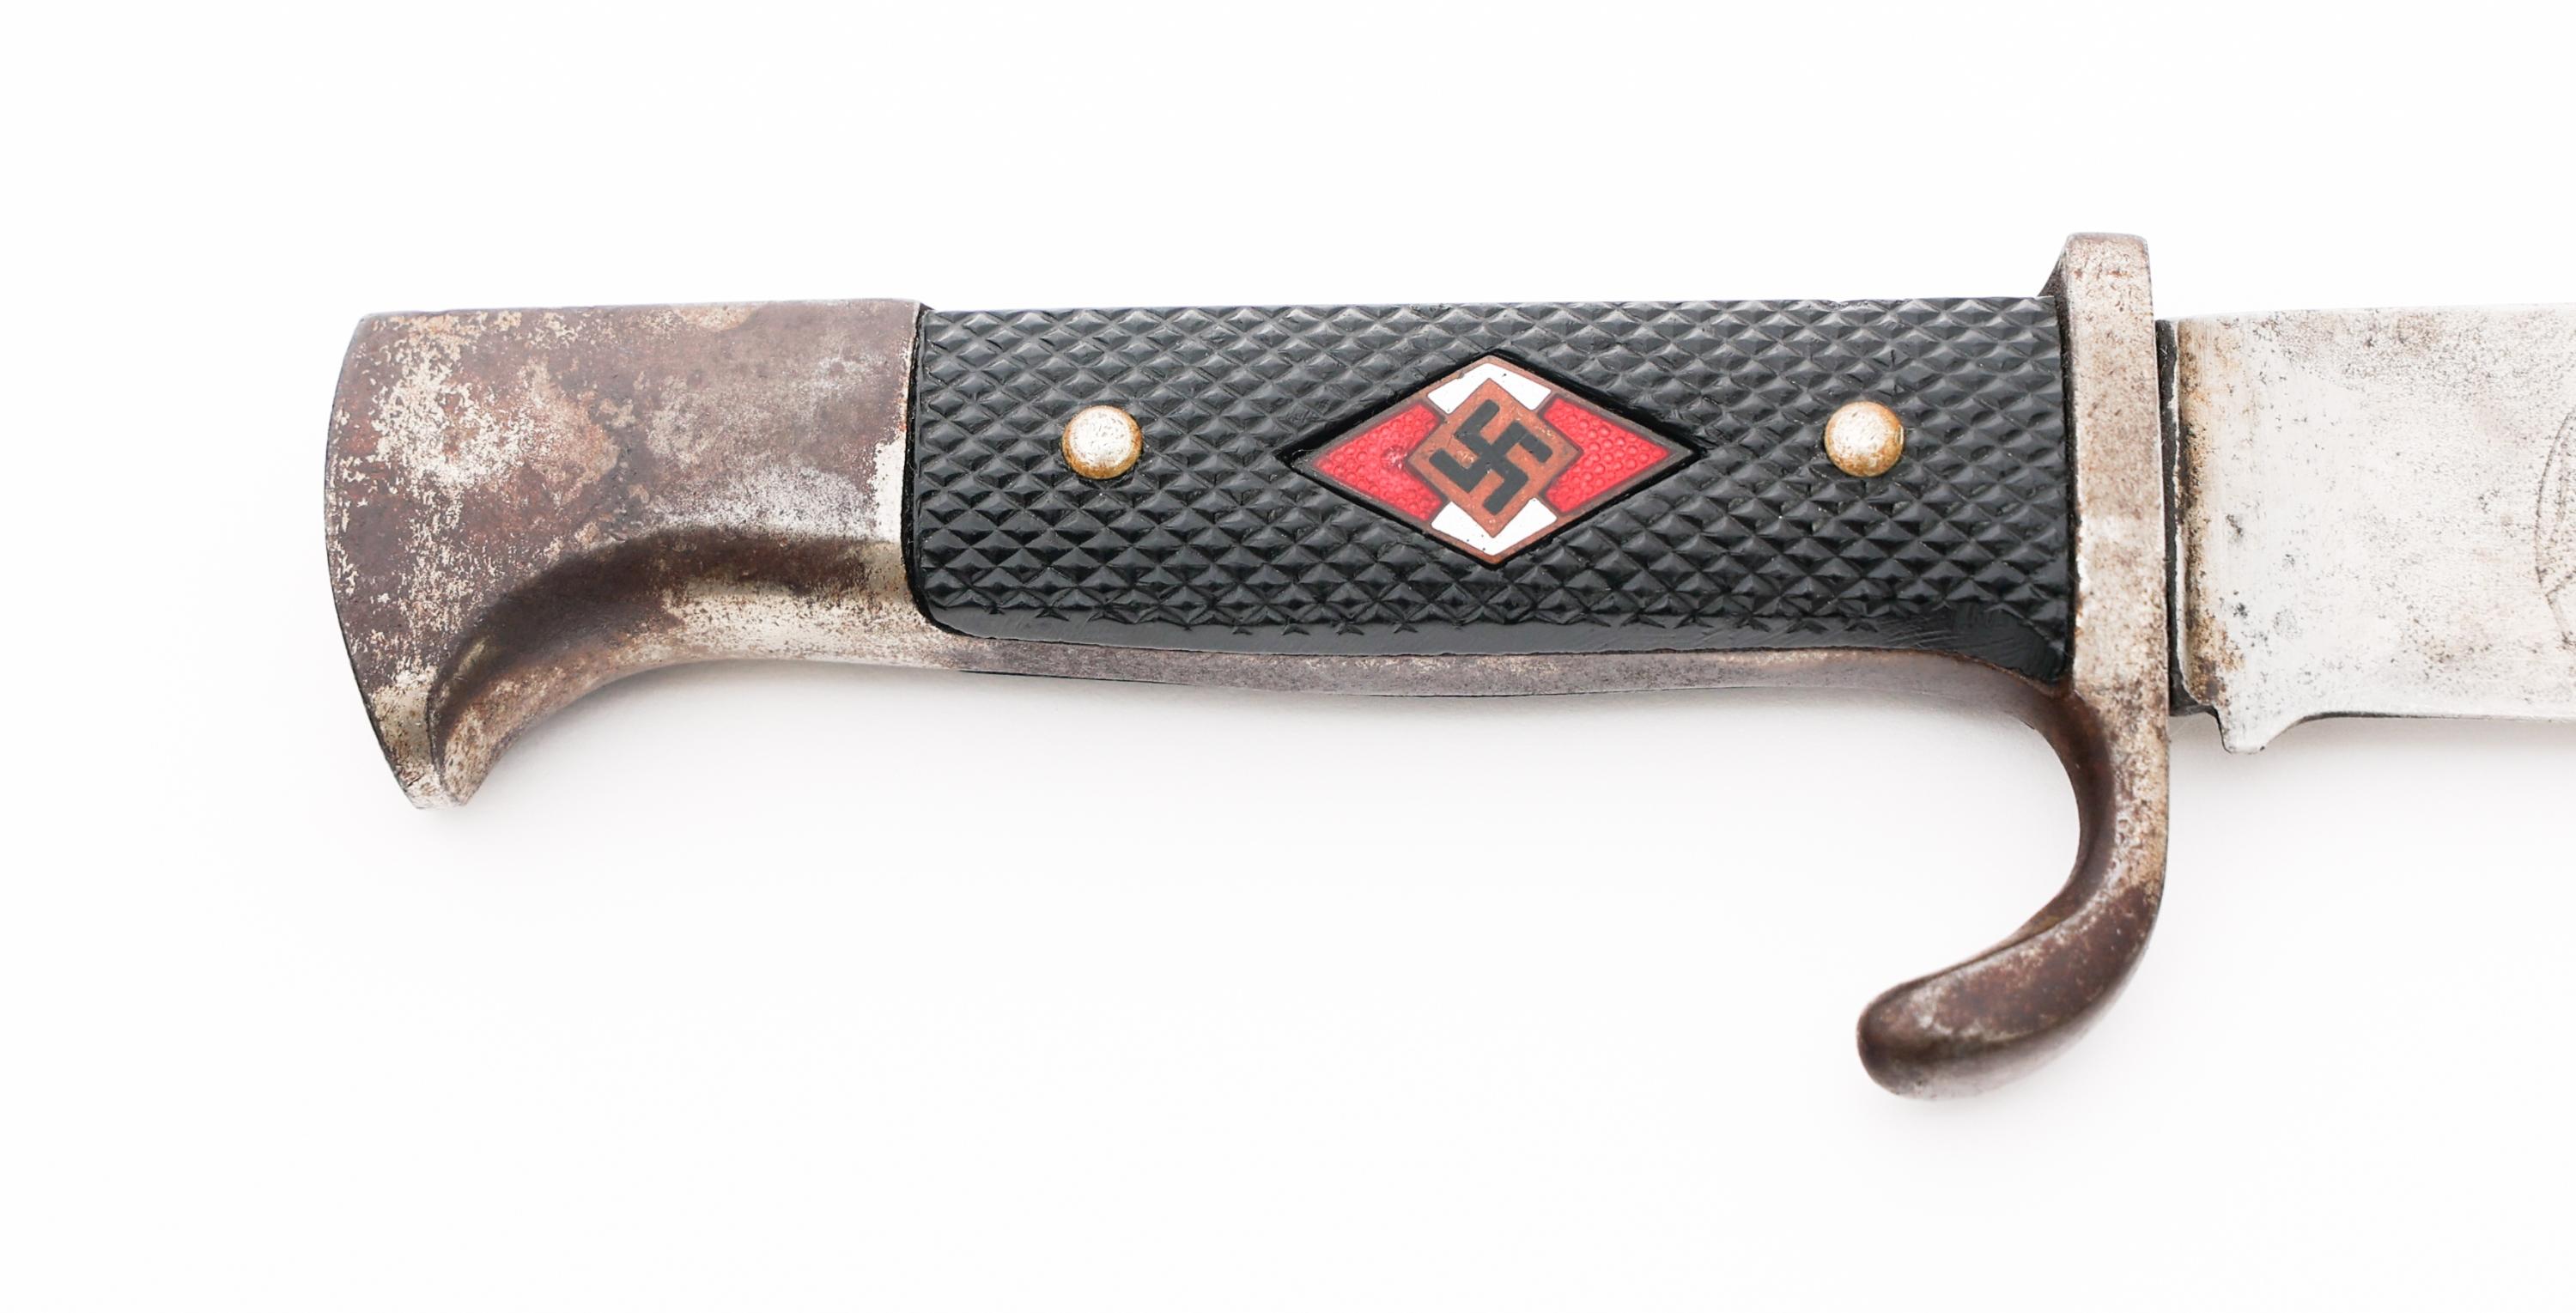 WWII GERMAN HITLER YOUTH KNIFE MOTTO by HEIDELBERG